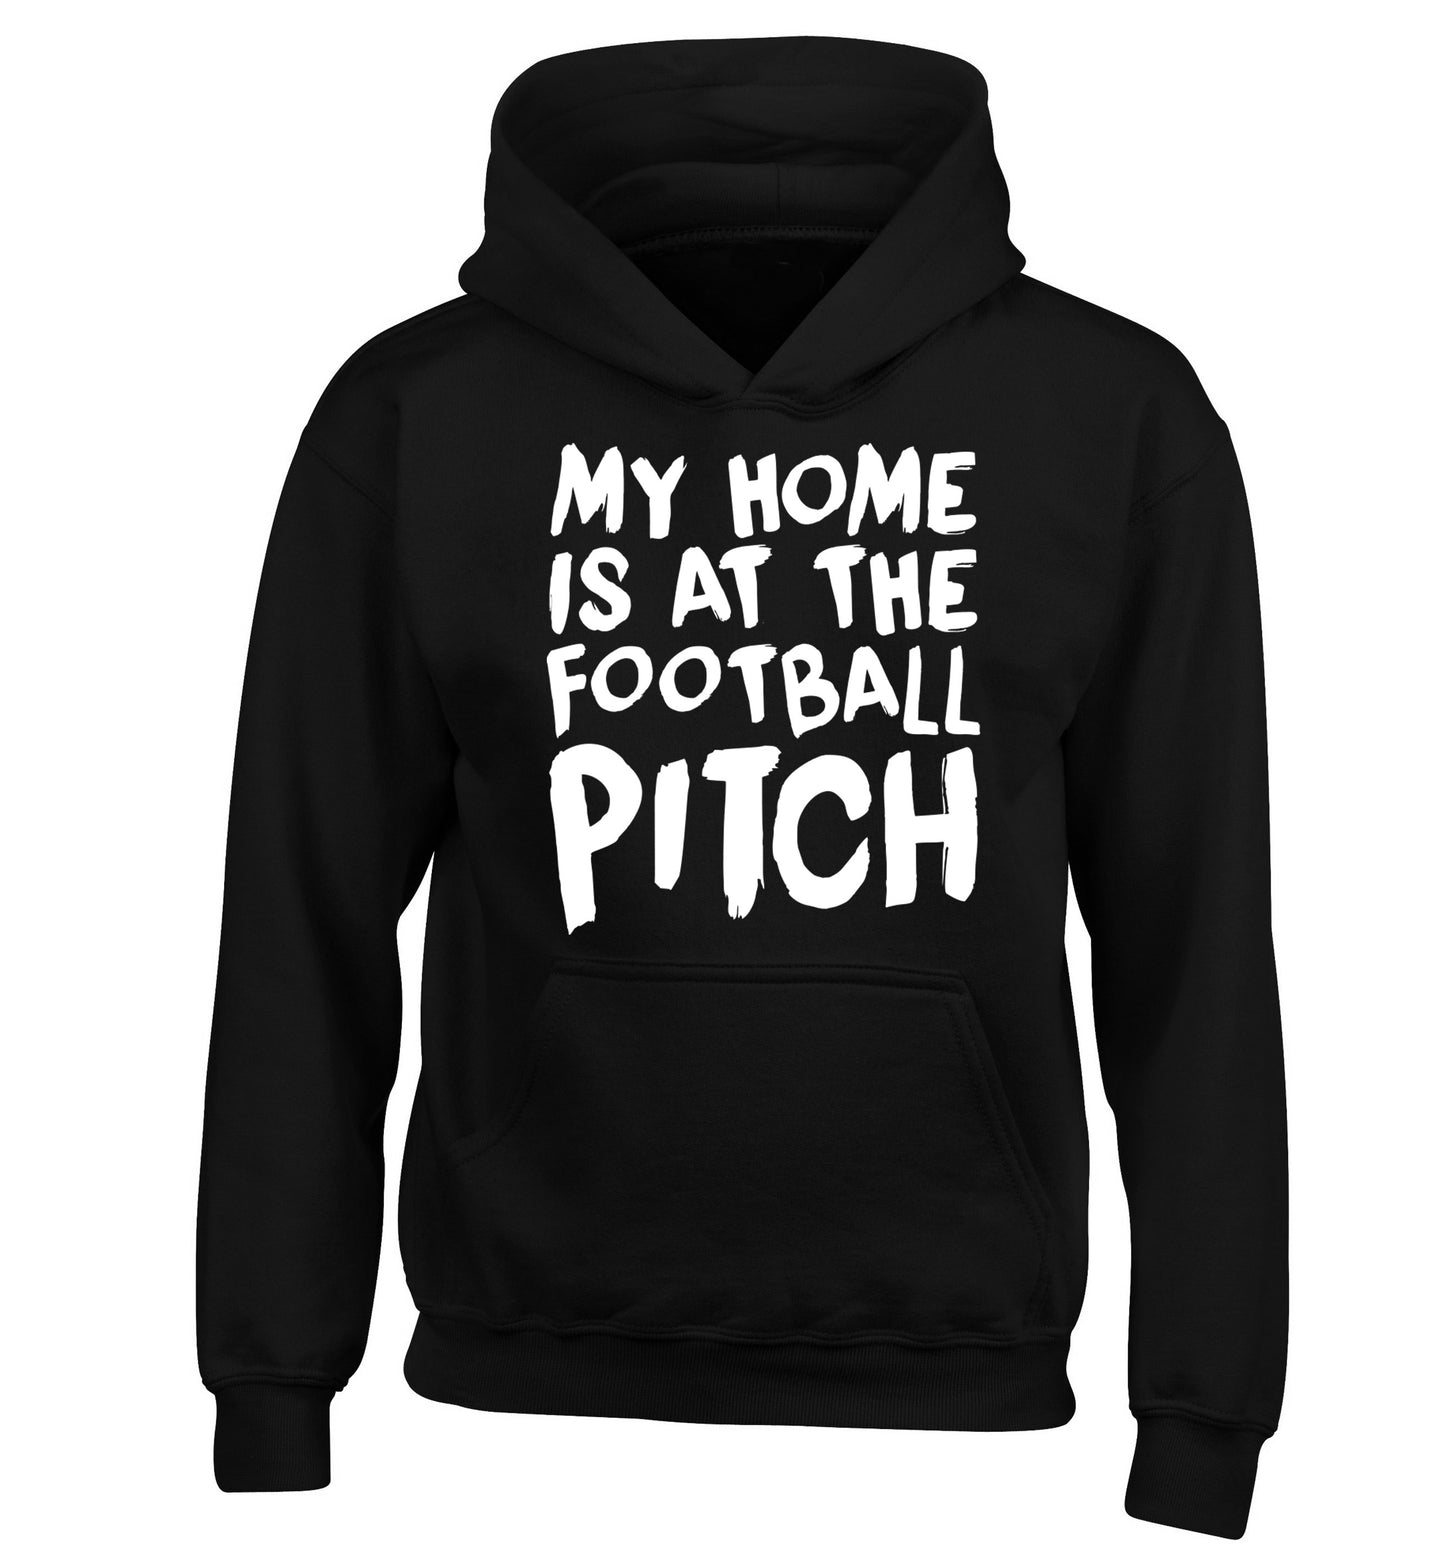 My home is at the football pitch children's black hoodie 12-14 Years